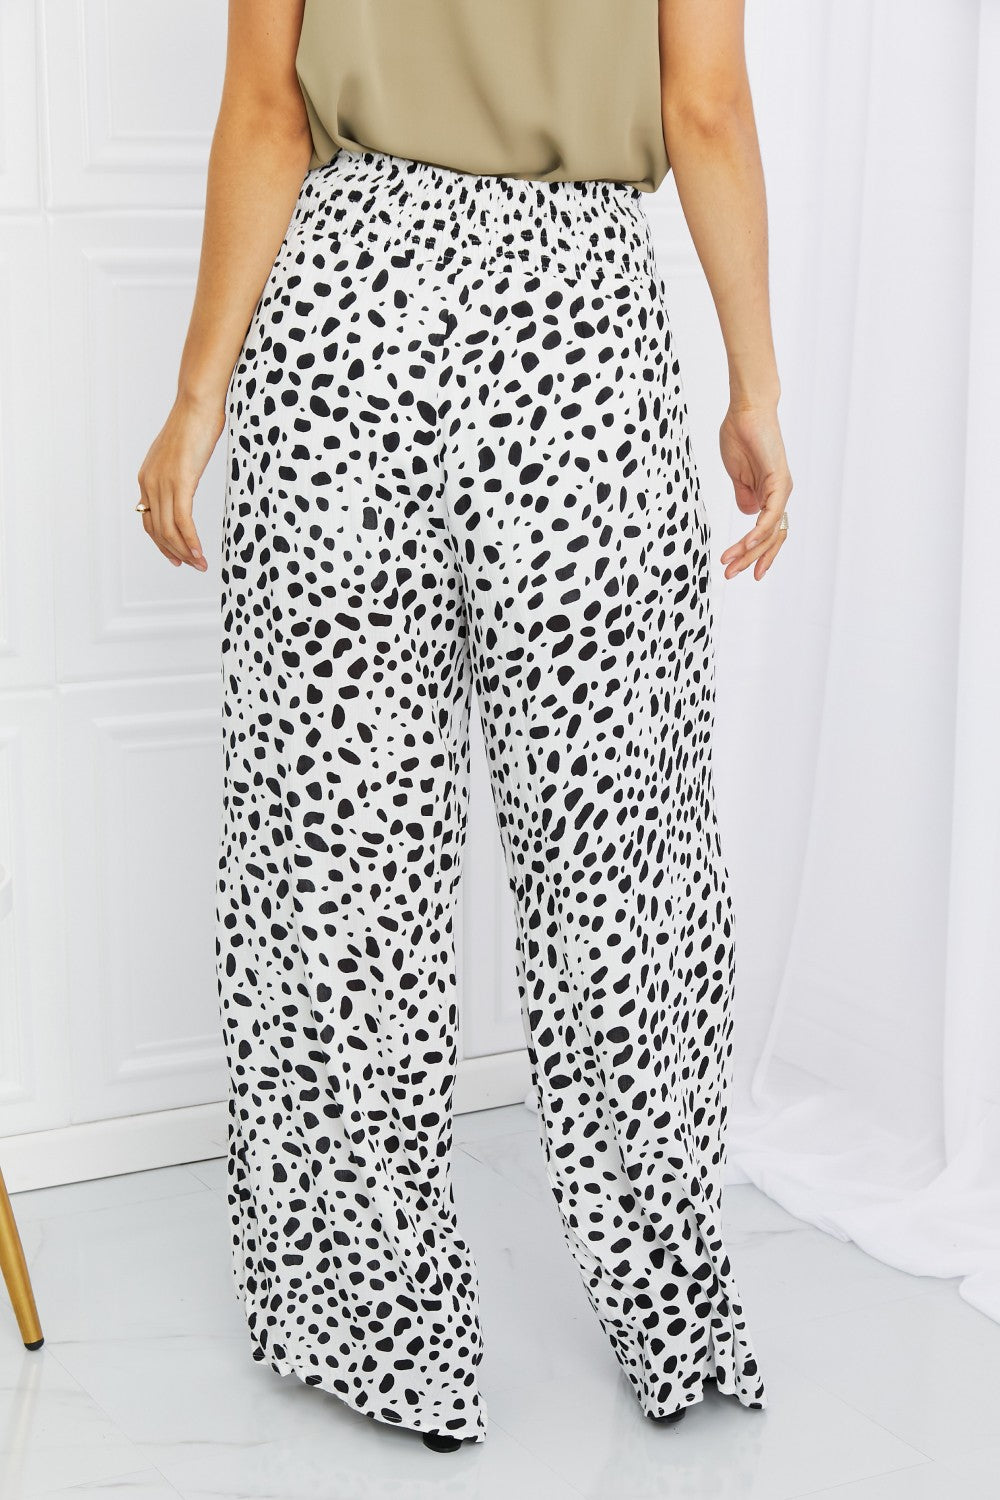 Leopard Chic: Animal Print Tied Pleated Wide Leg Pants in White | Pants - CHANELIA